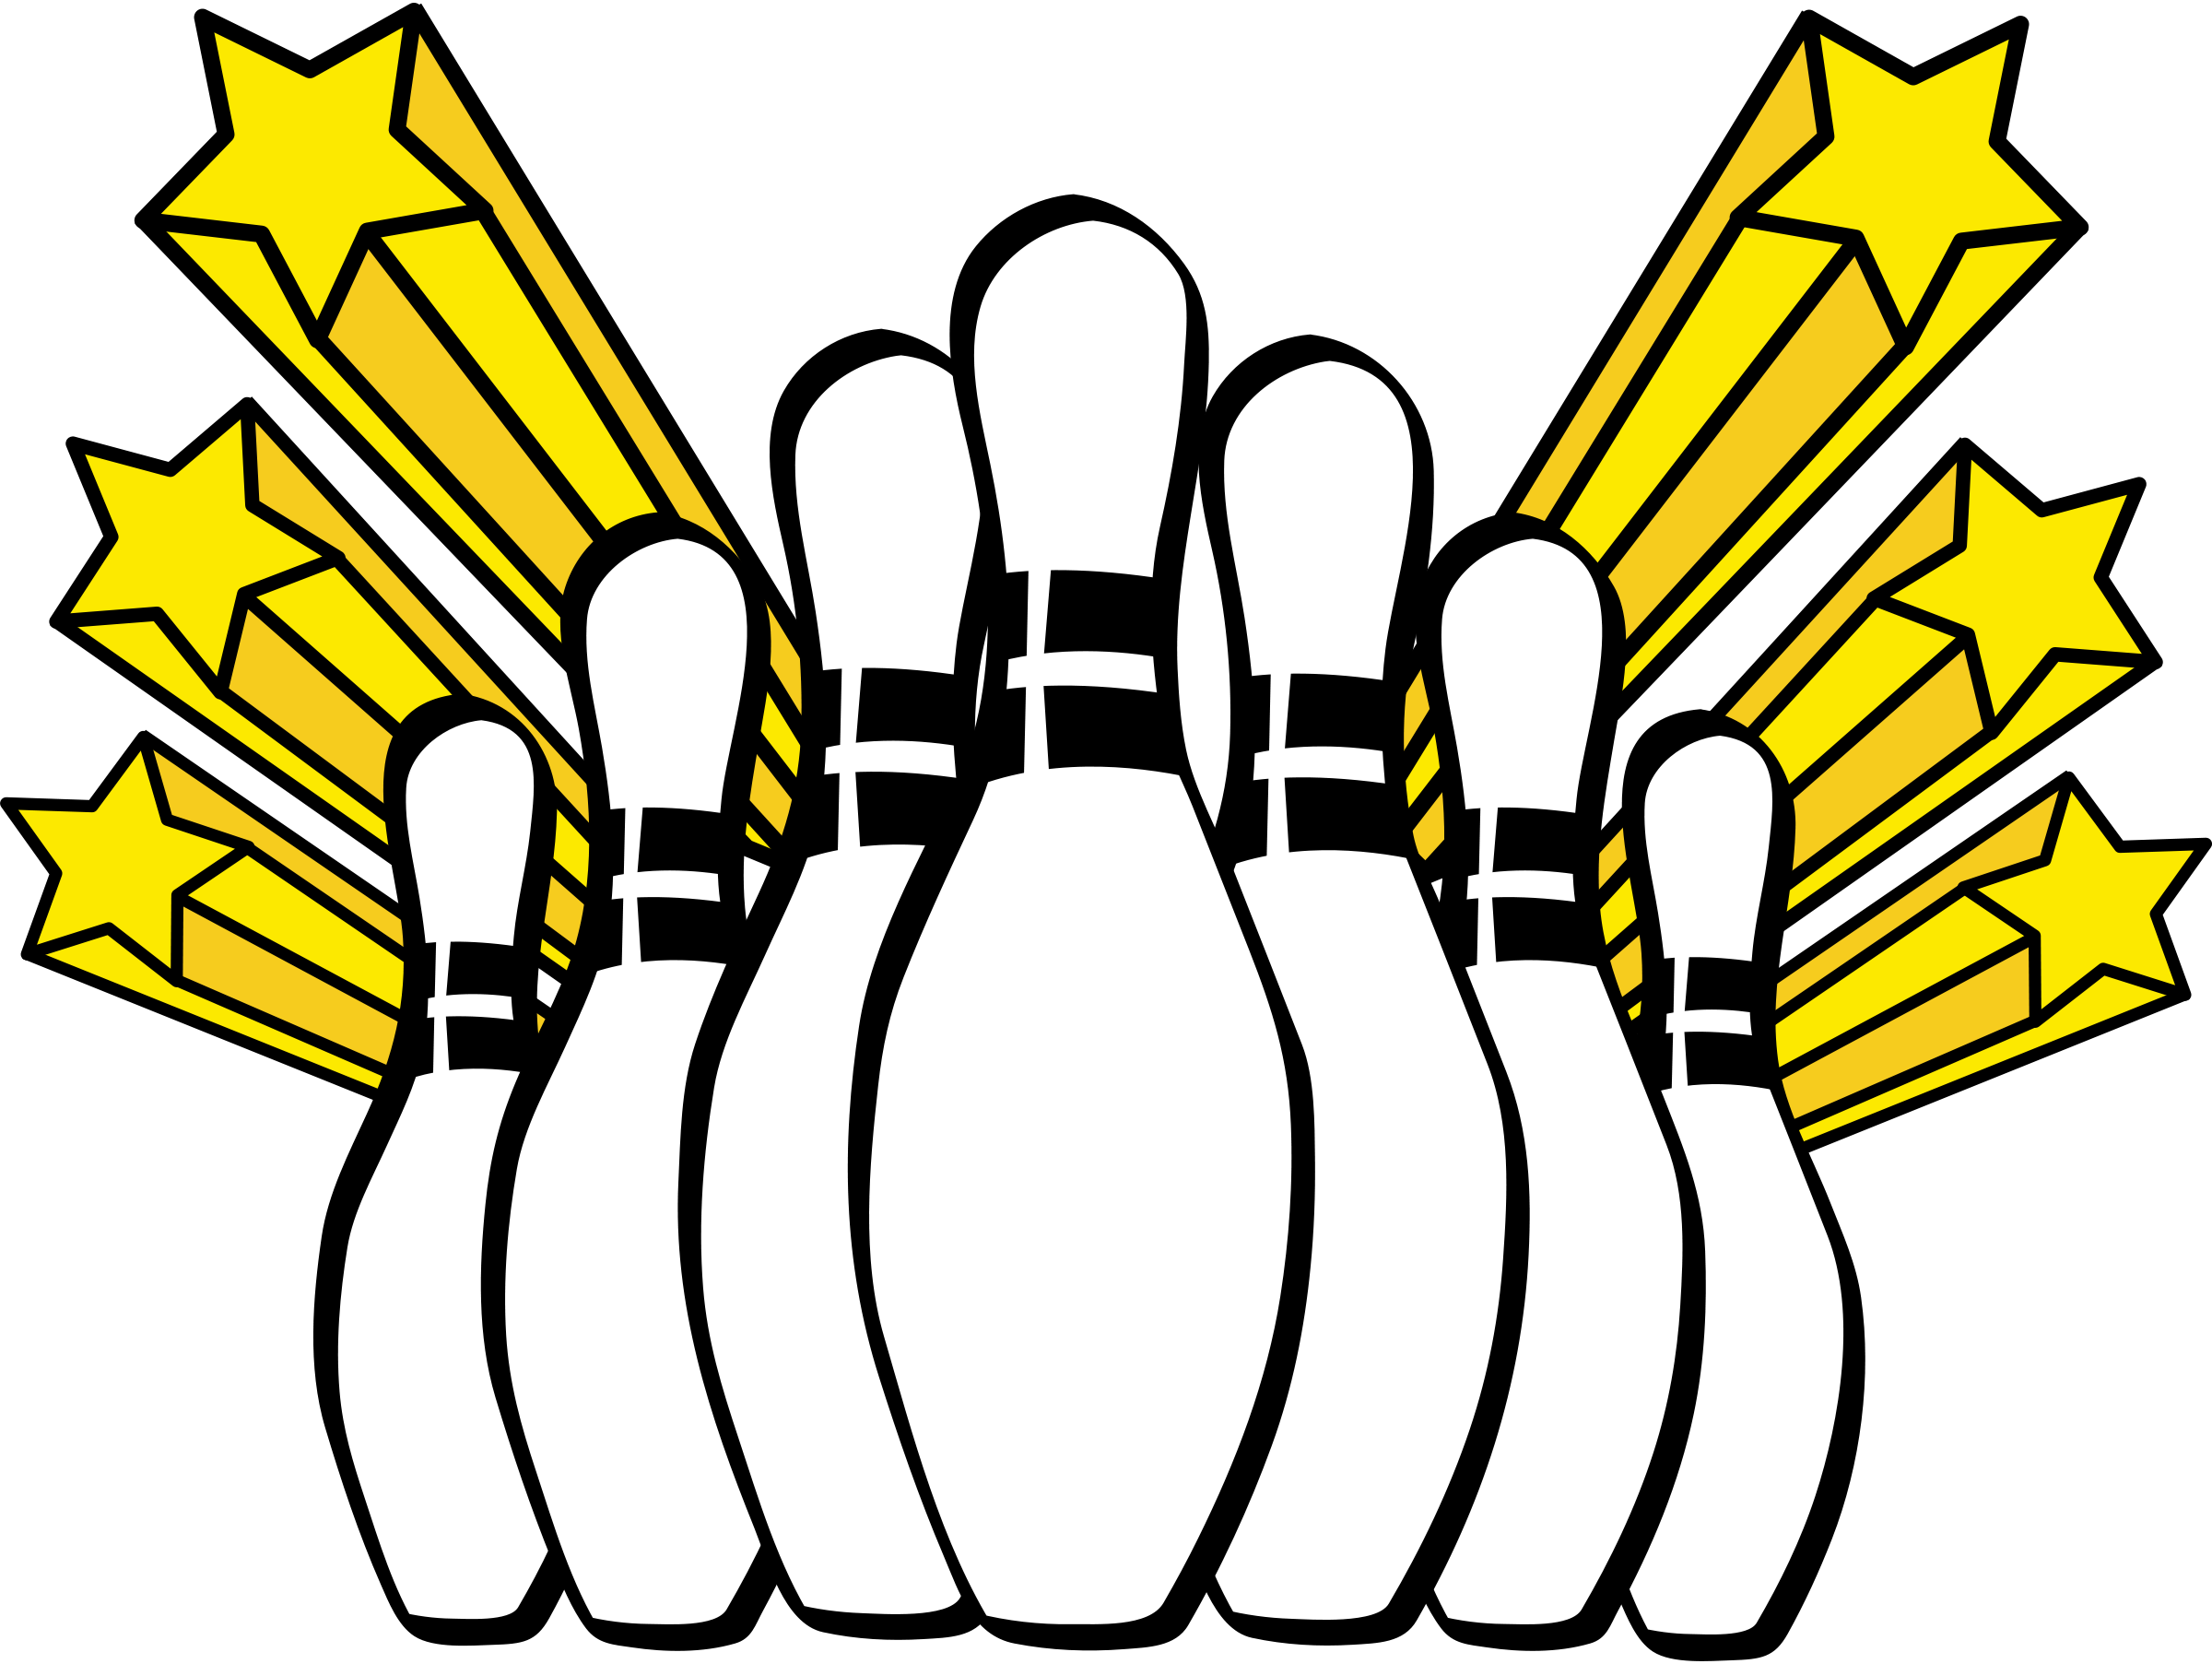 Retro Bowling Pin Clipart   Clipart Best